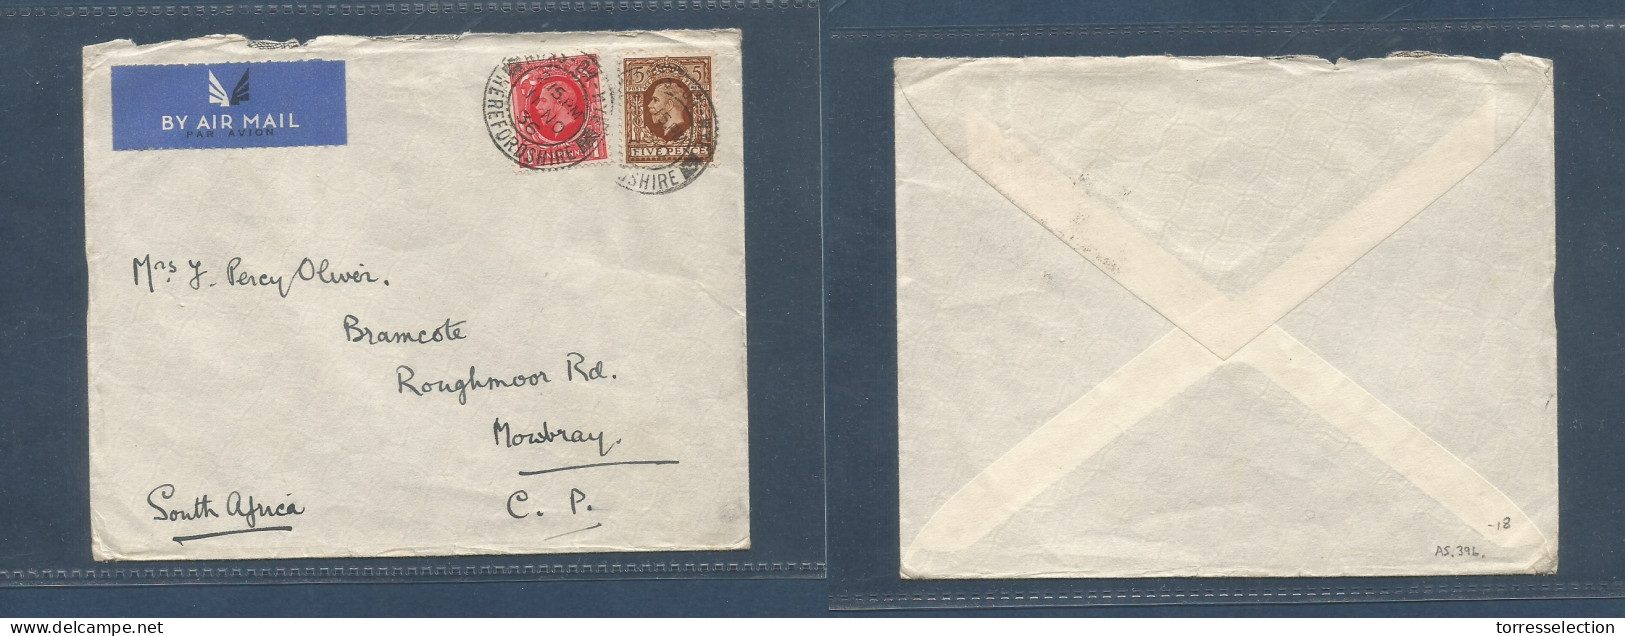 Great Britain - XX. 1936 (11 Nov) Herefordshire - South Africa, Mowbray. 6d Rate Air Imperial Fkd Envelope AS396. XSALE. - ...-1840 Vorläufer